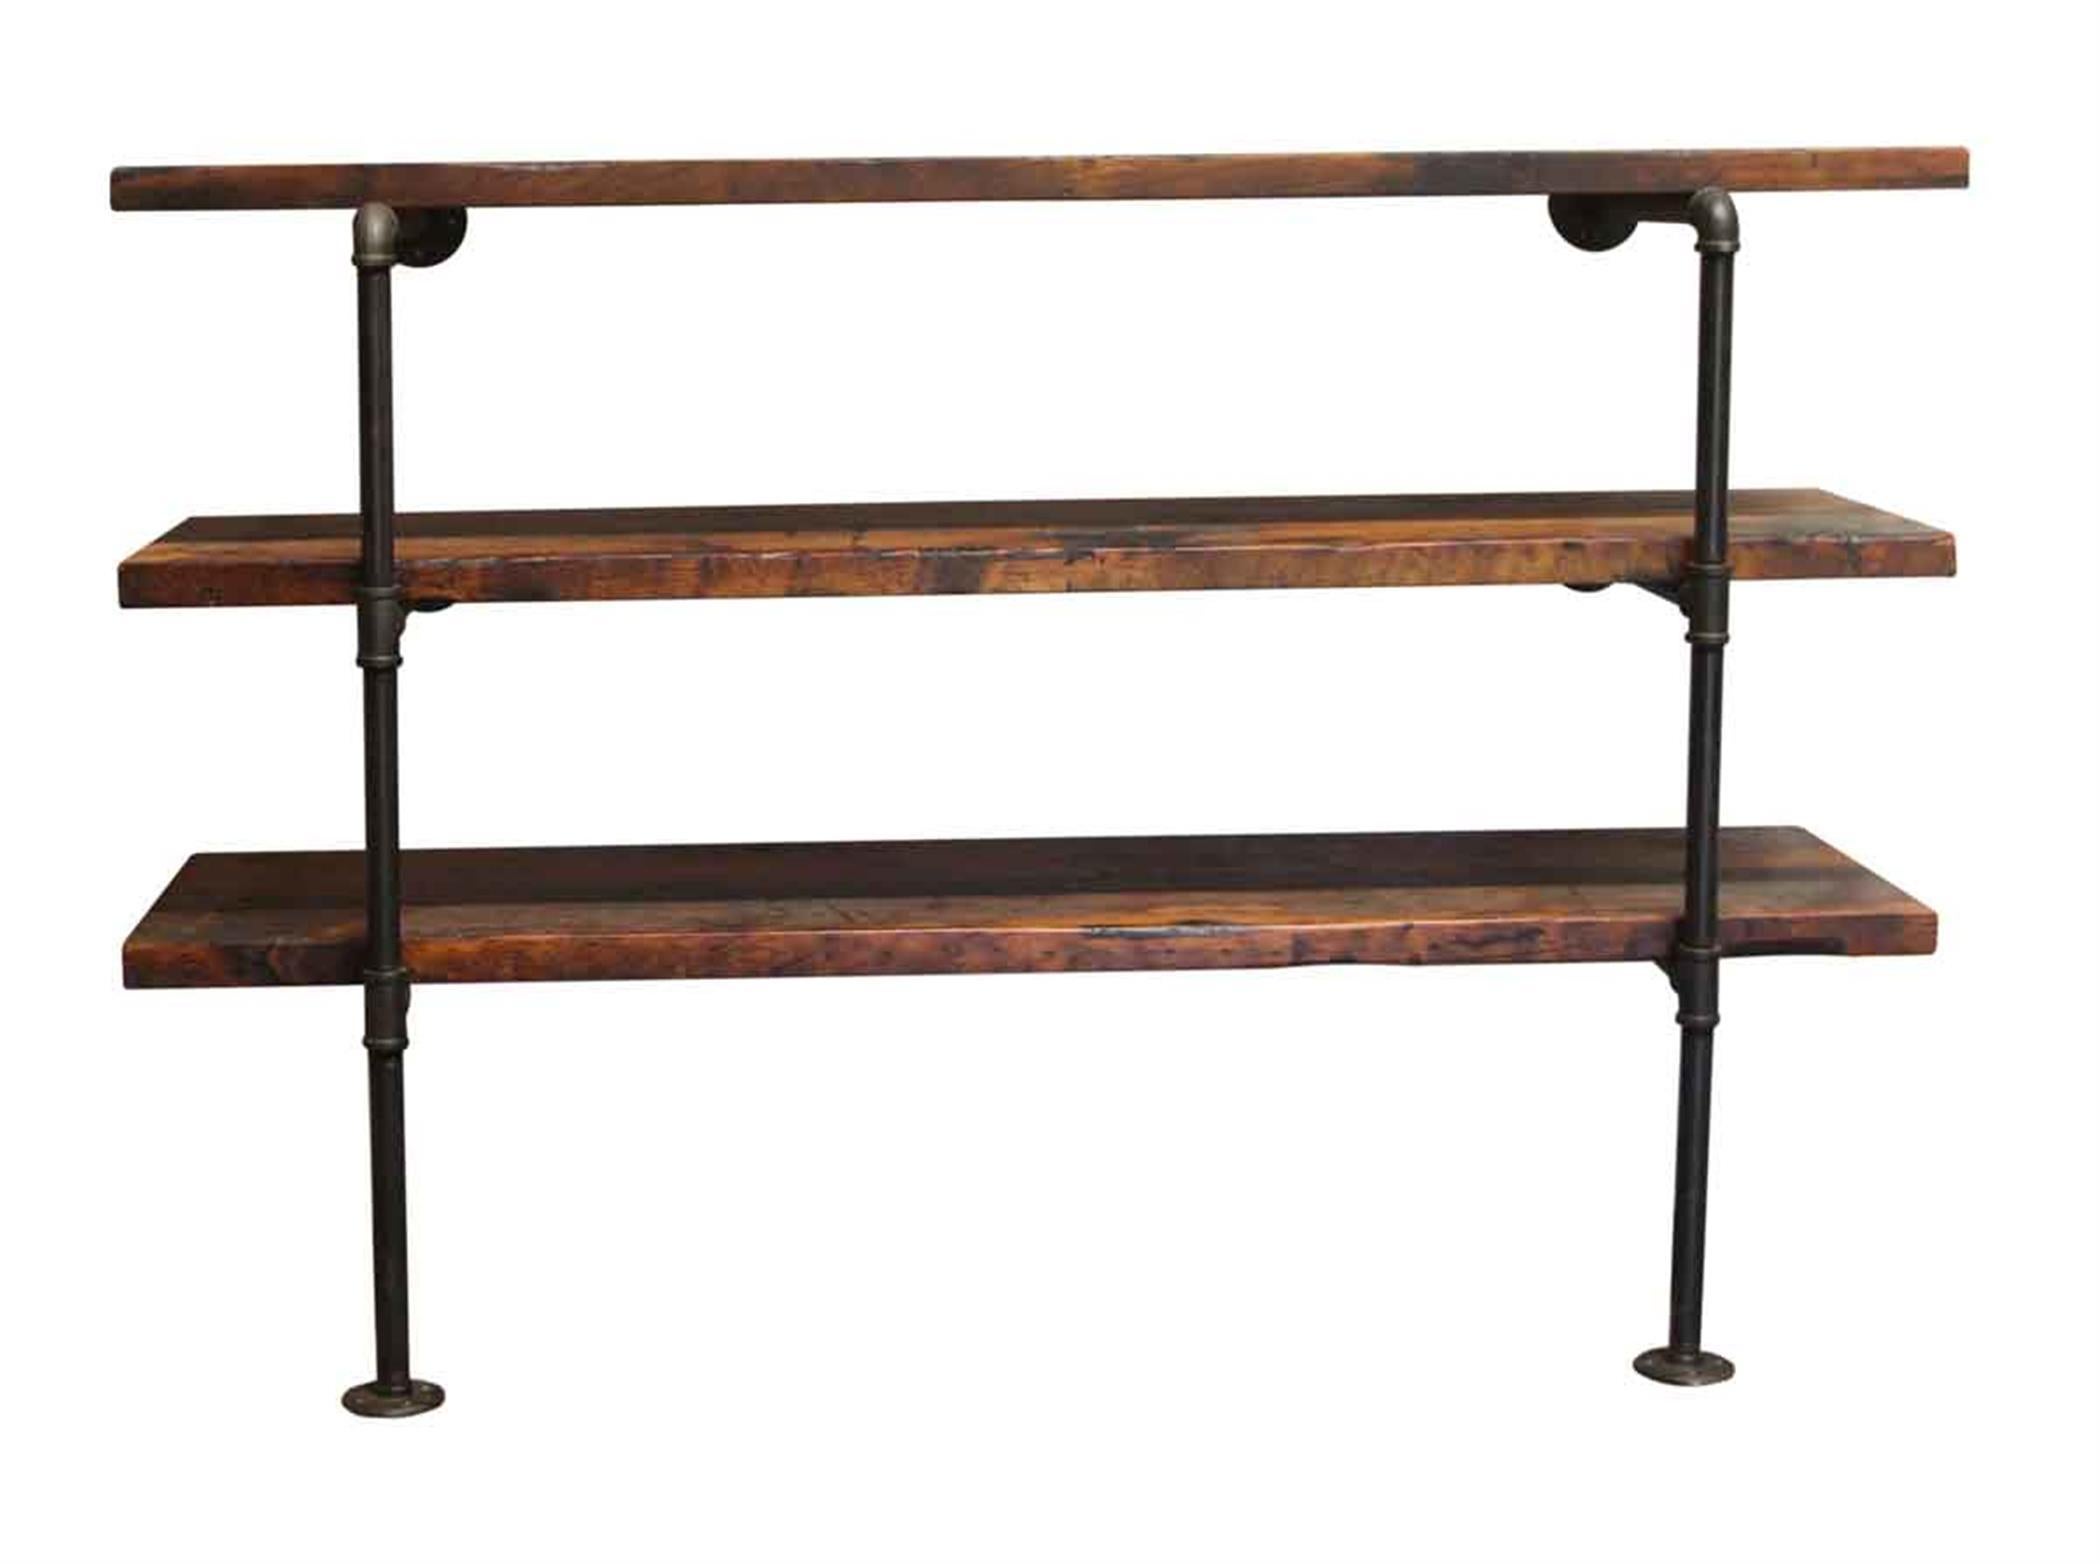 Dark Stained Pine Shelf Unit with Pipe Legs (Industriell)